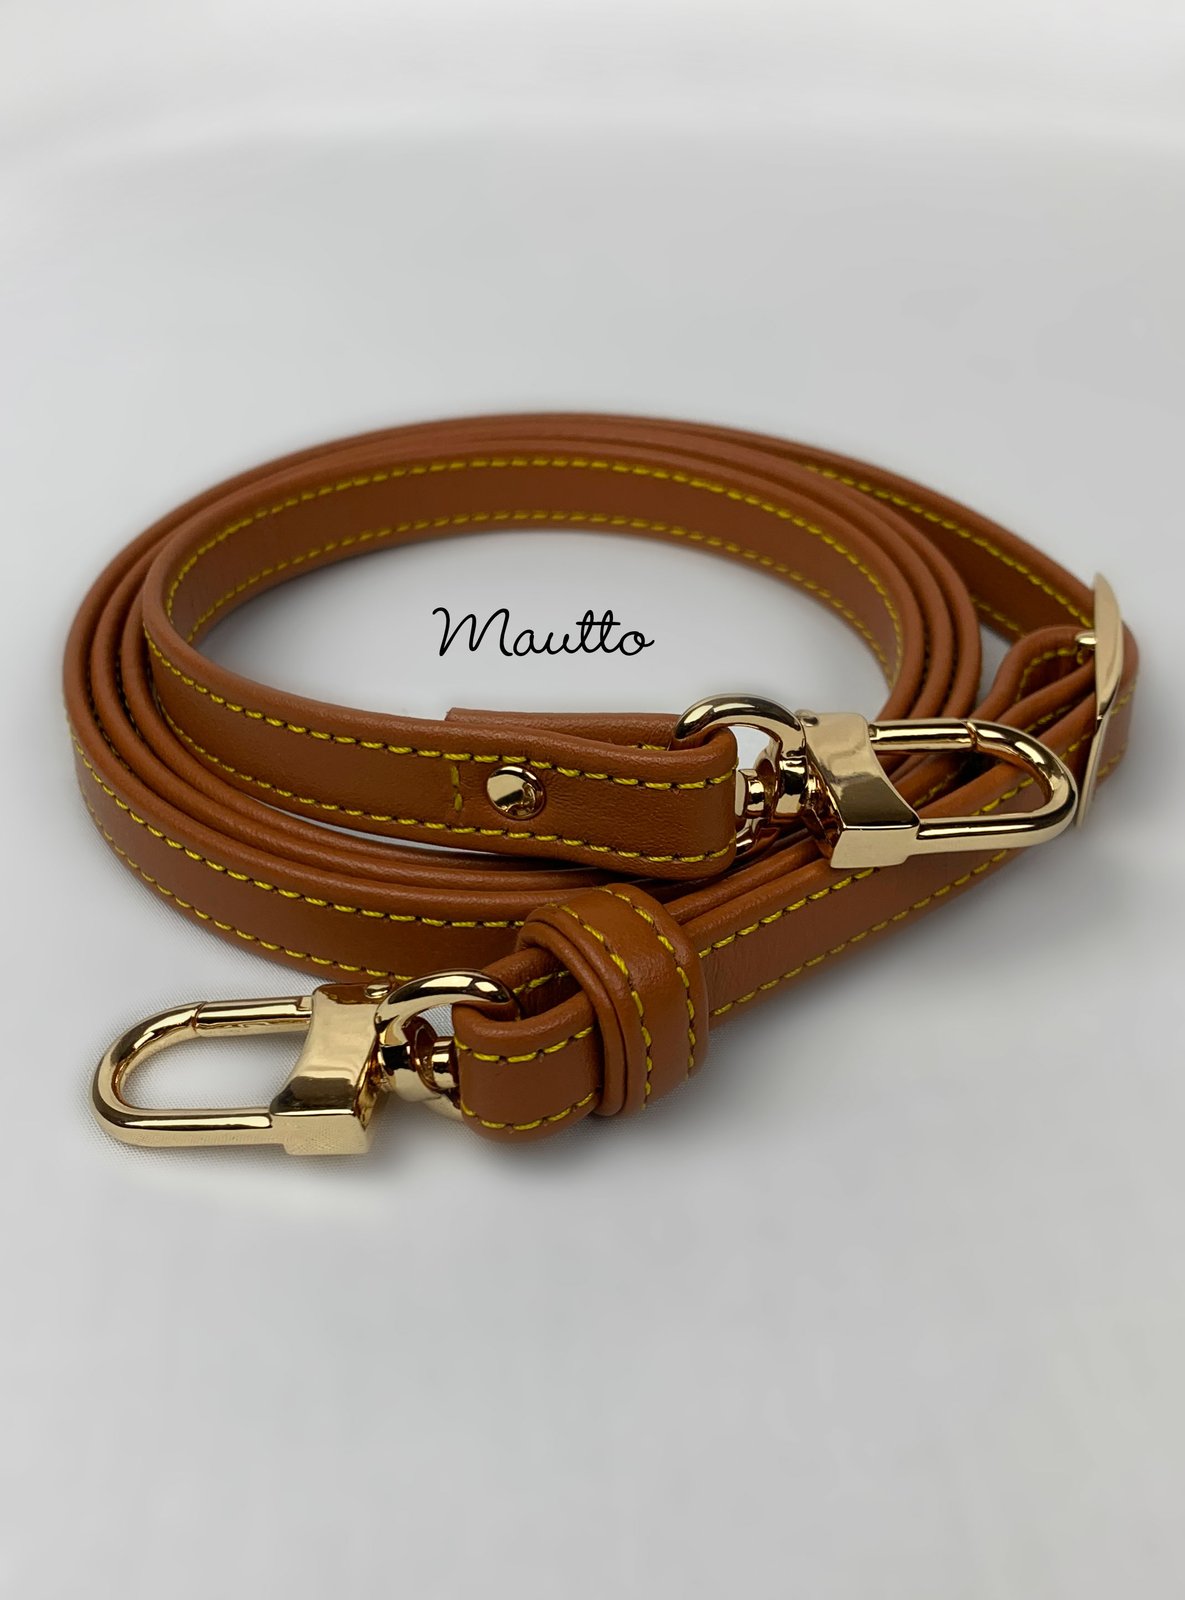 Dark Tan Leather Strap with Yellow Stitching for Louis Vuitton Coach   More  75 Standard Width  Replacement Purse Straps  Handbag Accessories   Leather Chain  more  Mautto